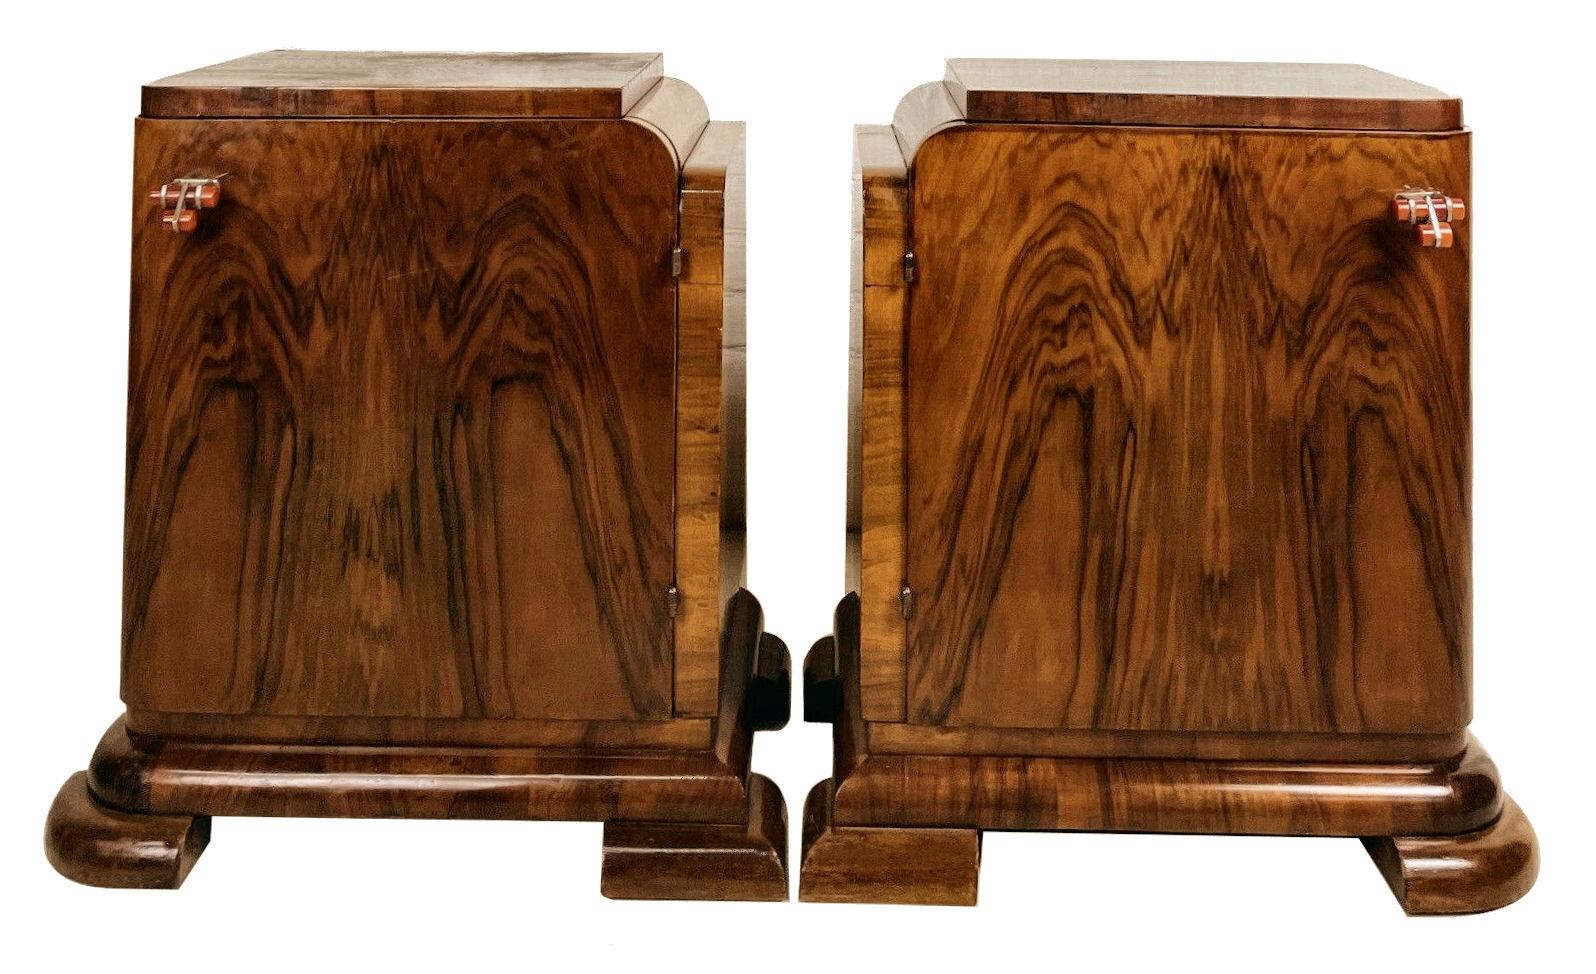 Chrome Art Deco Pair of Matching Bedside Table Nightstands in Walnut, c1930